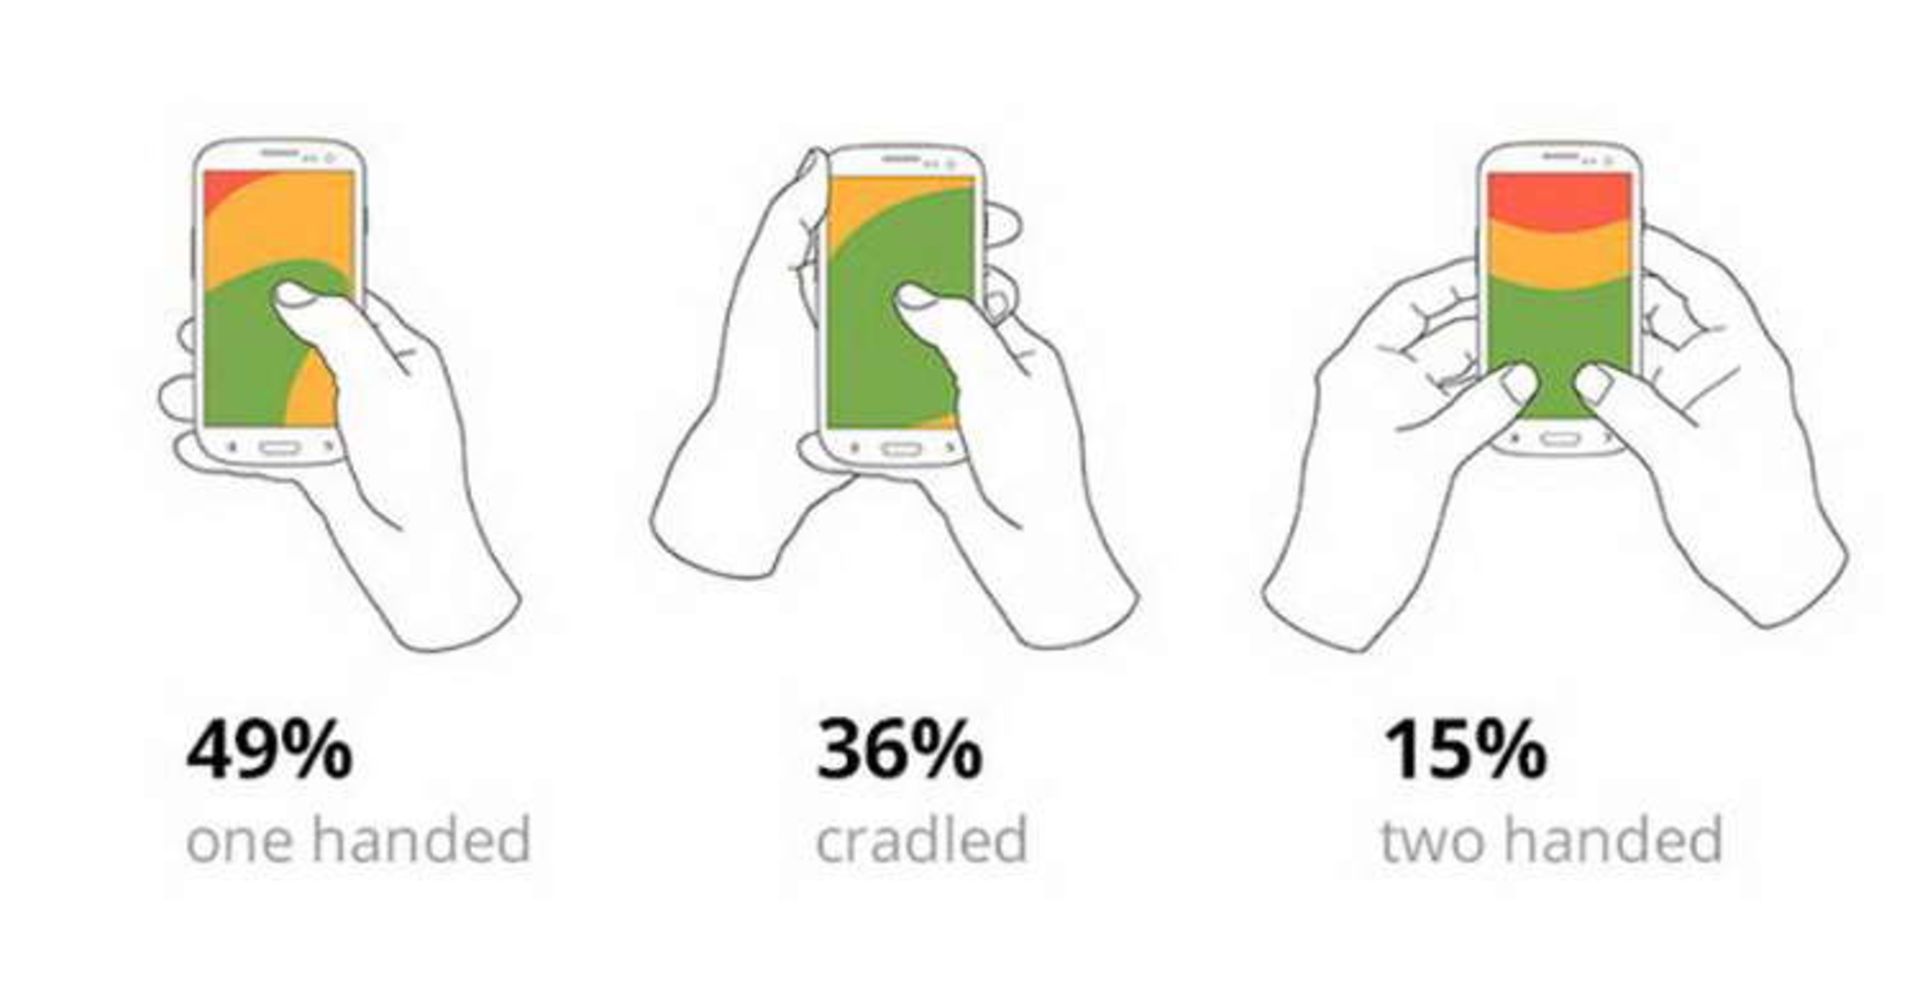 three basic ways of how people hold their phone